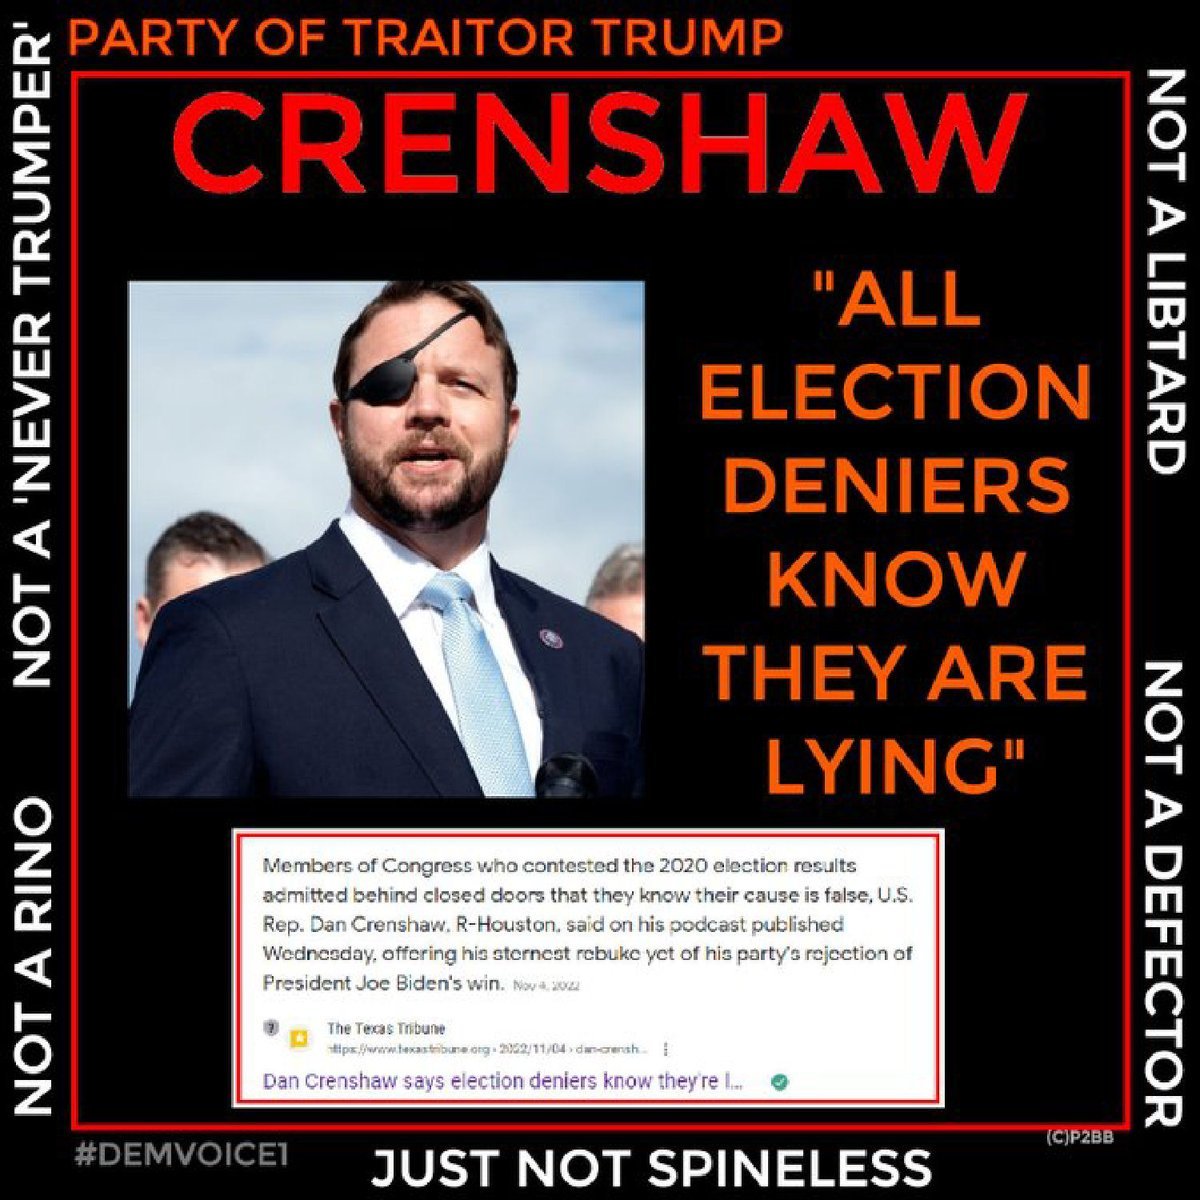 #DemVoice #USDemocracy Crenshaw said they were all lying around midterms. Notice the <crickets>